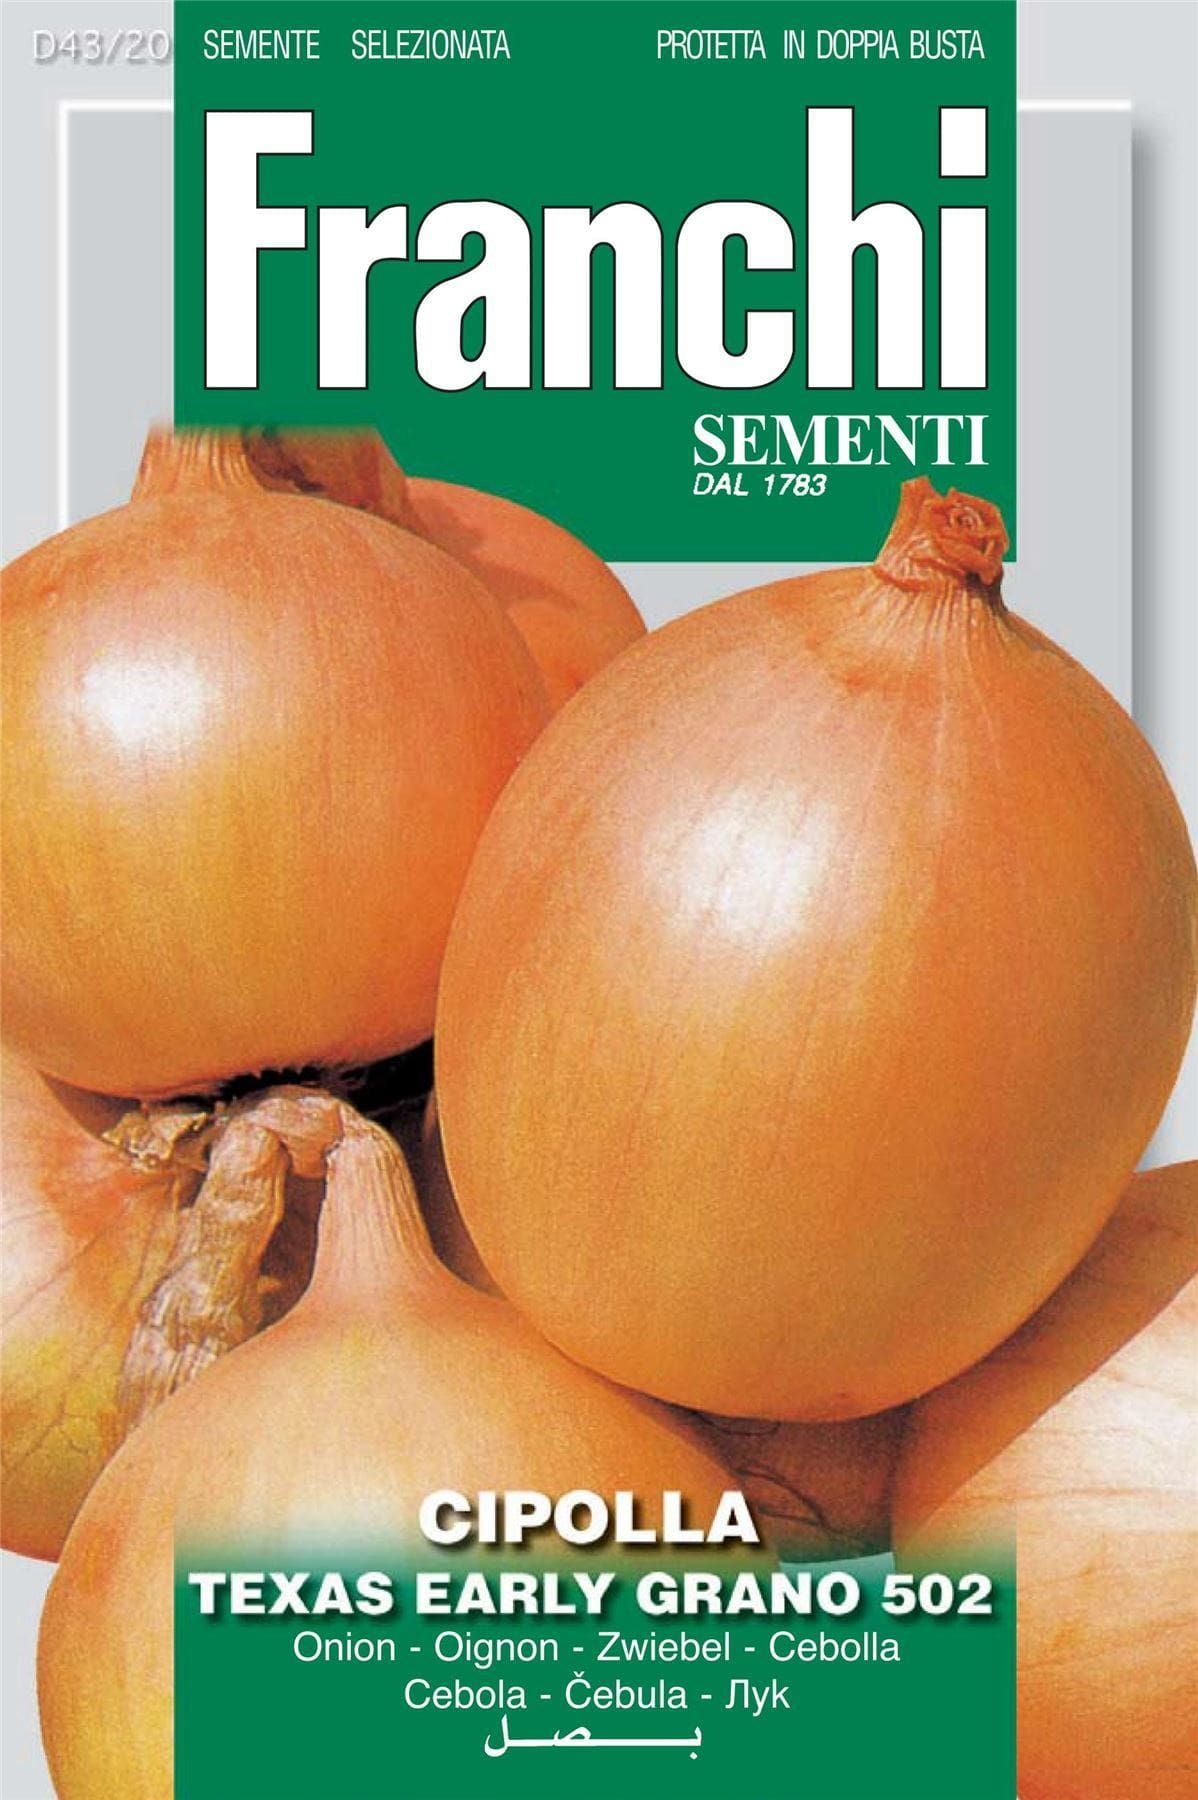 Franchi Seeds of Italy Onion Texas Early Grano 502 - Seeds